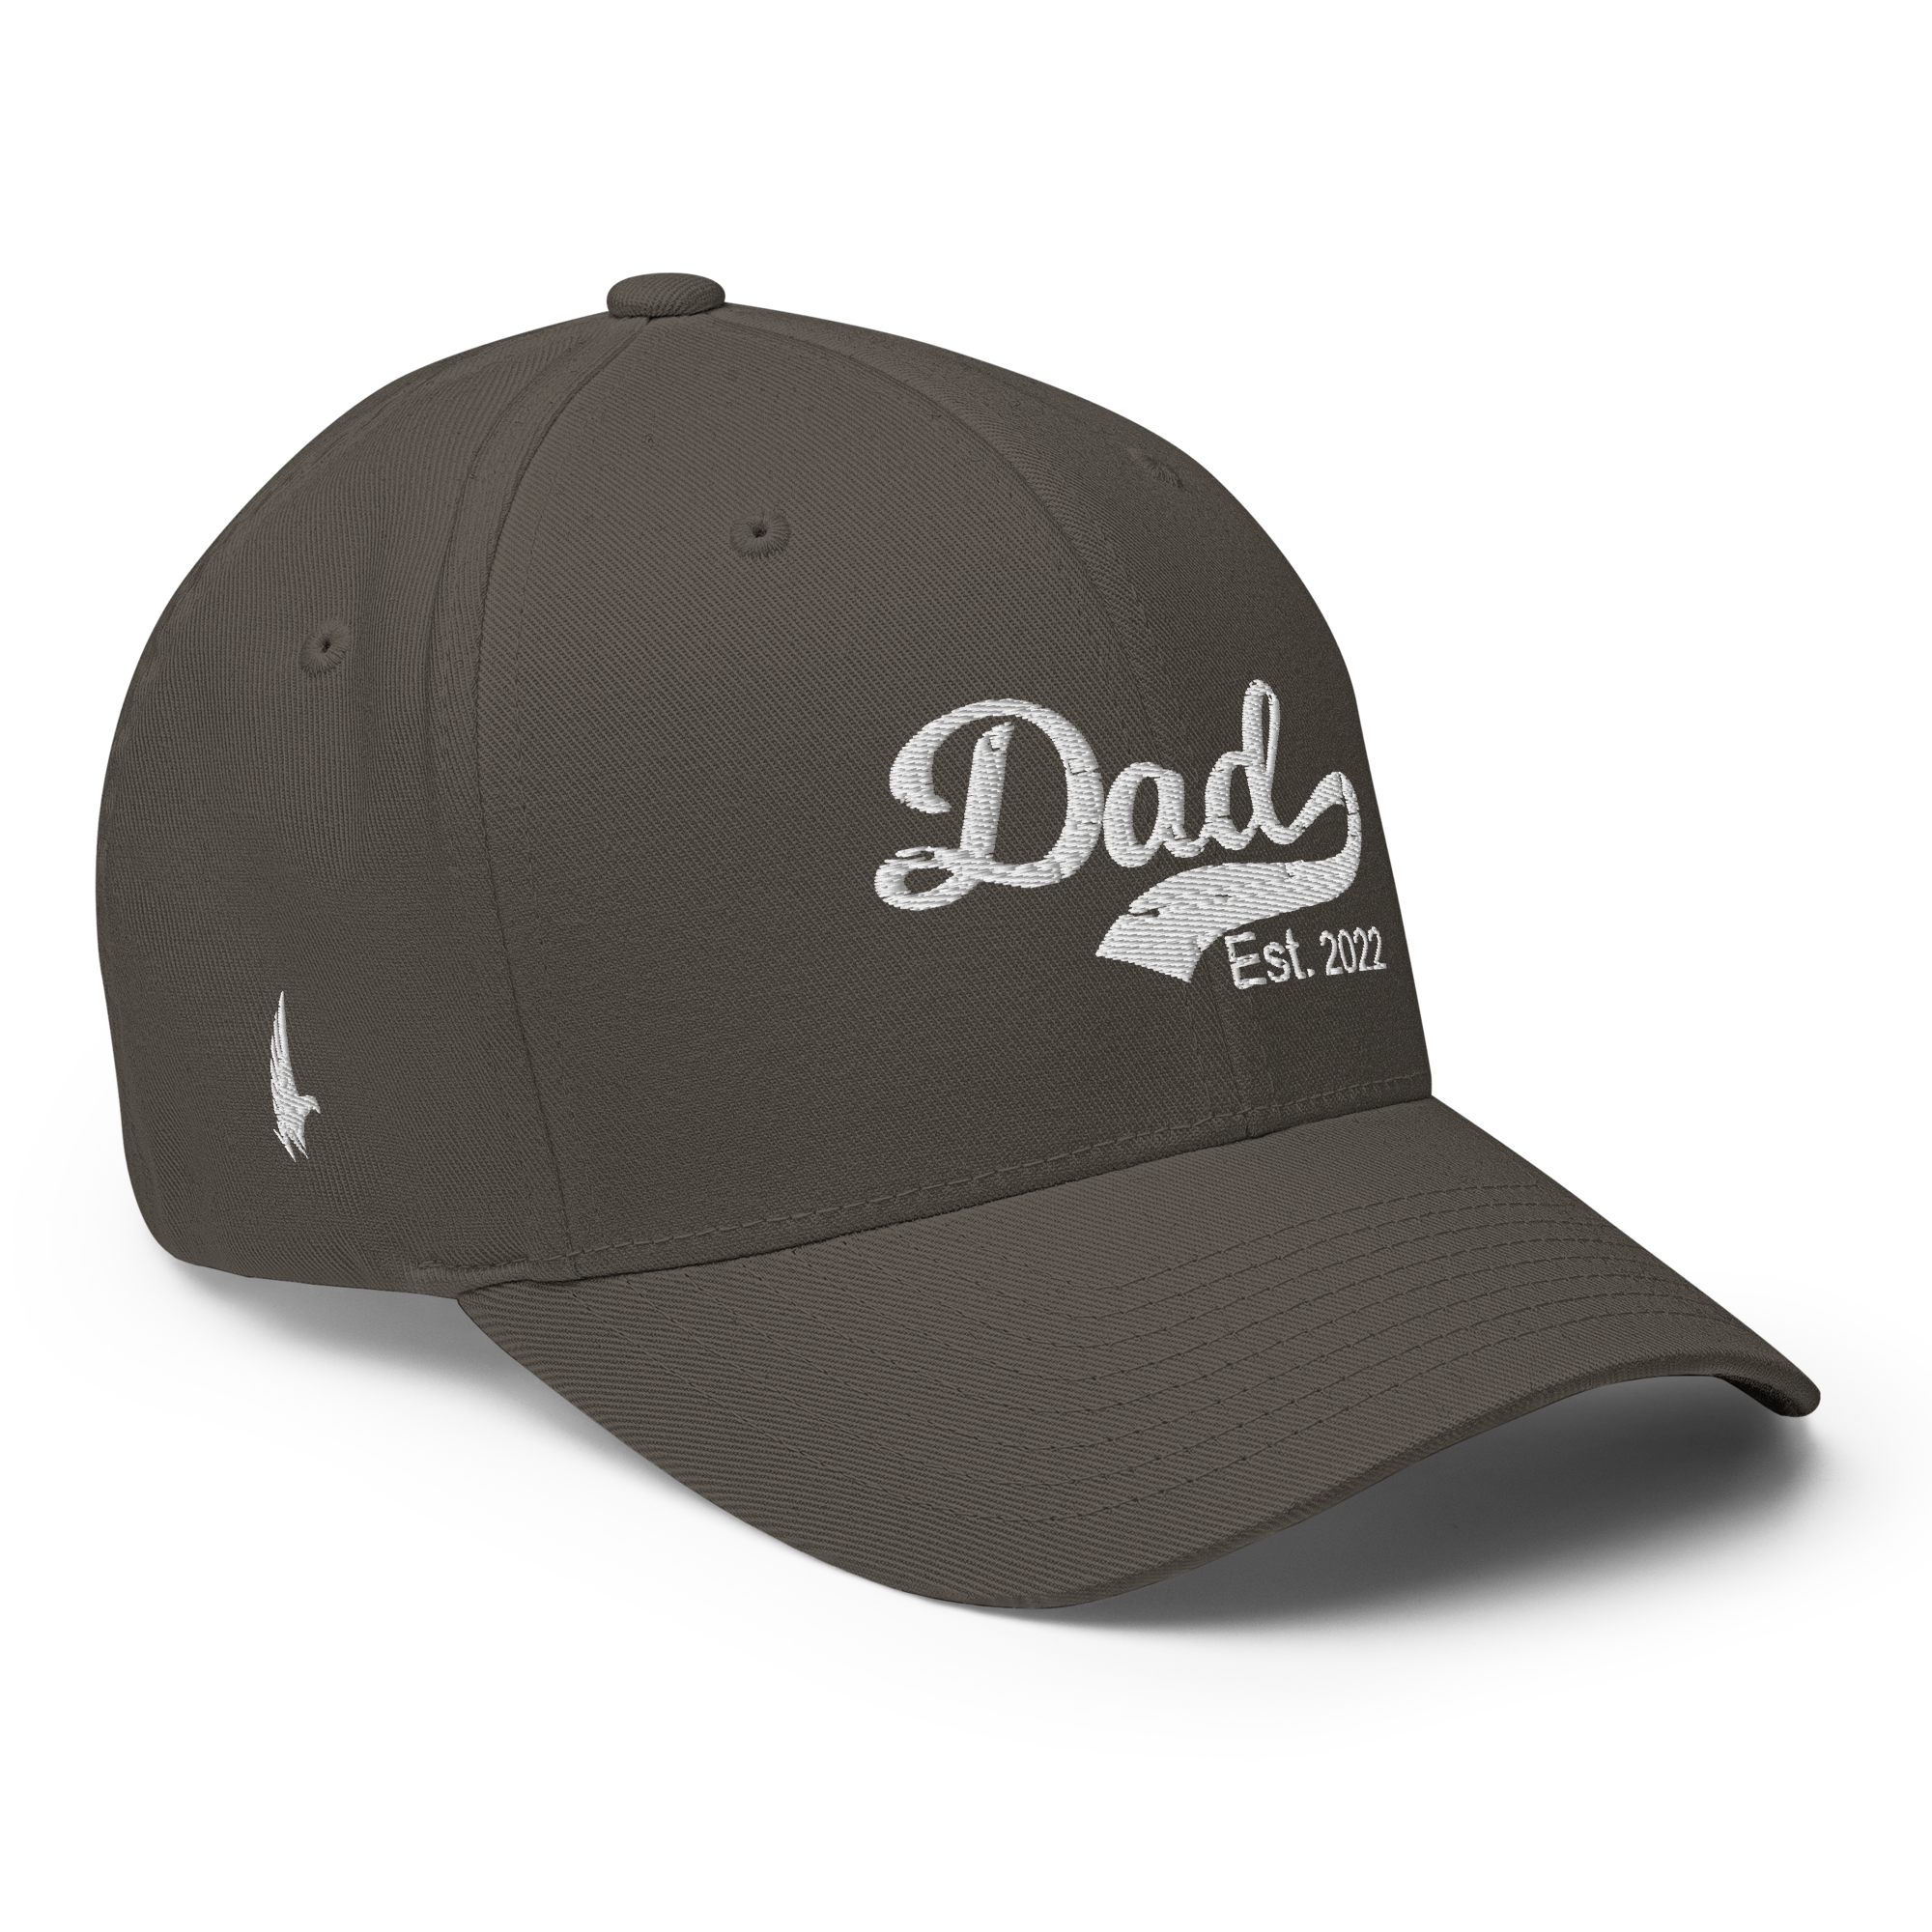 Dad Est 2022 Fitted Hat Charcoal Grey - Loyalty Vibes